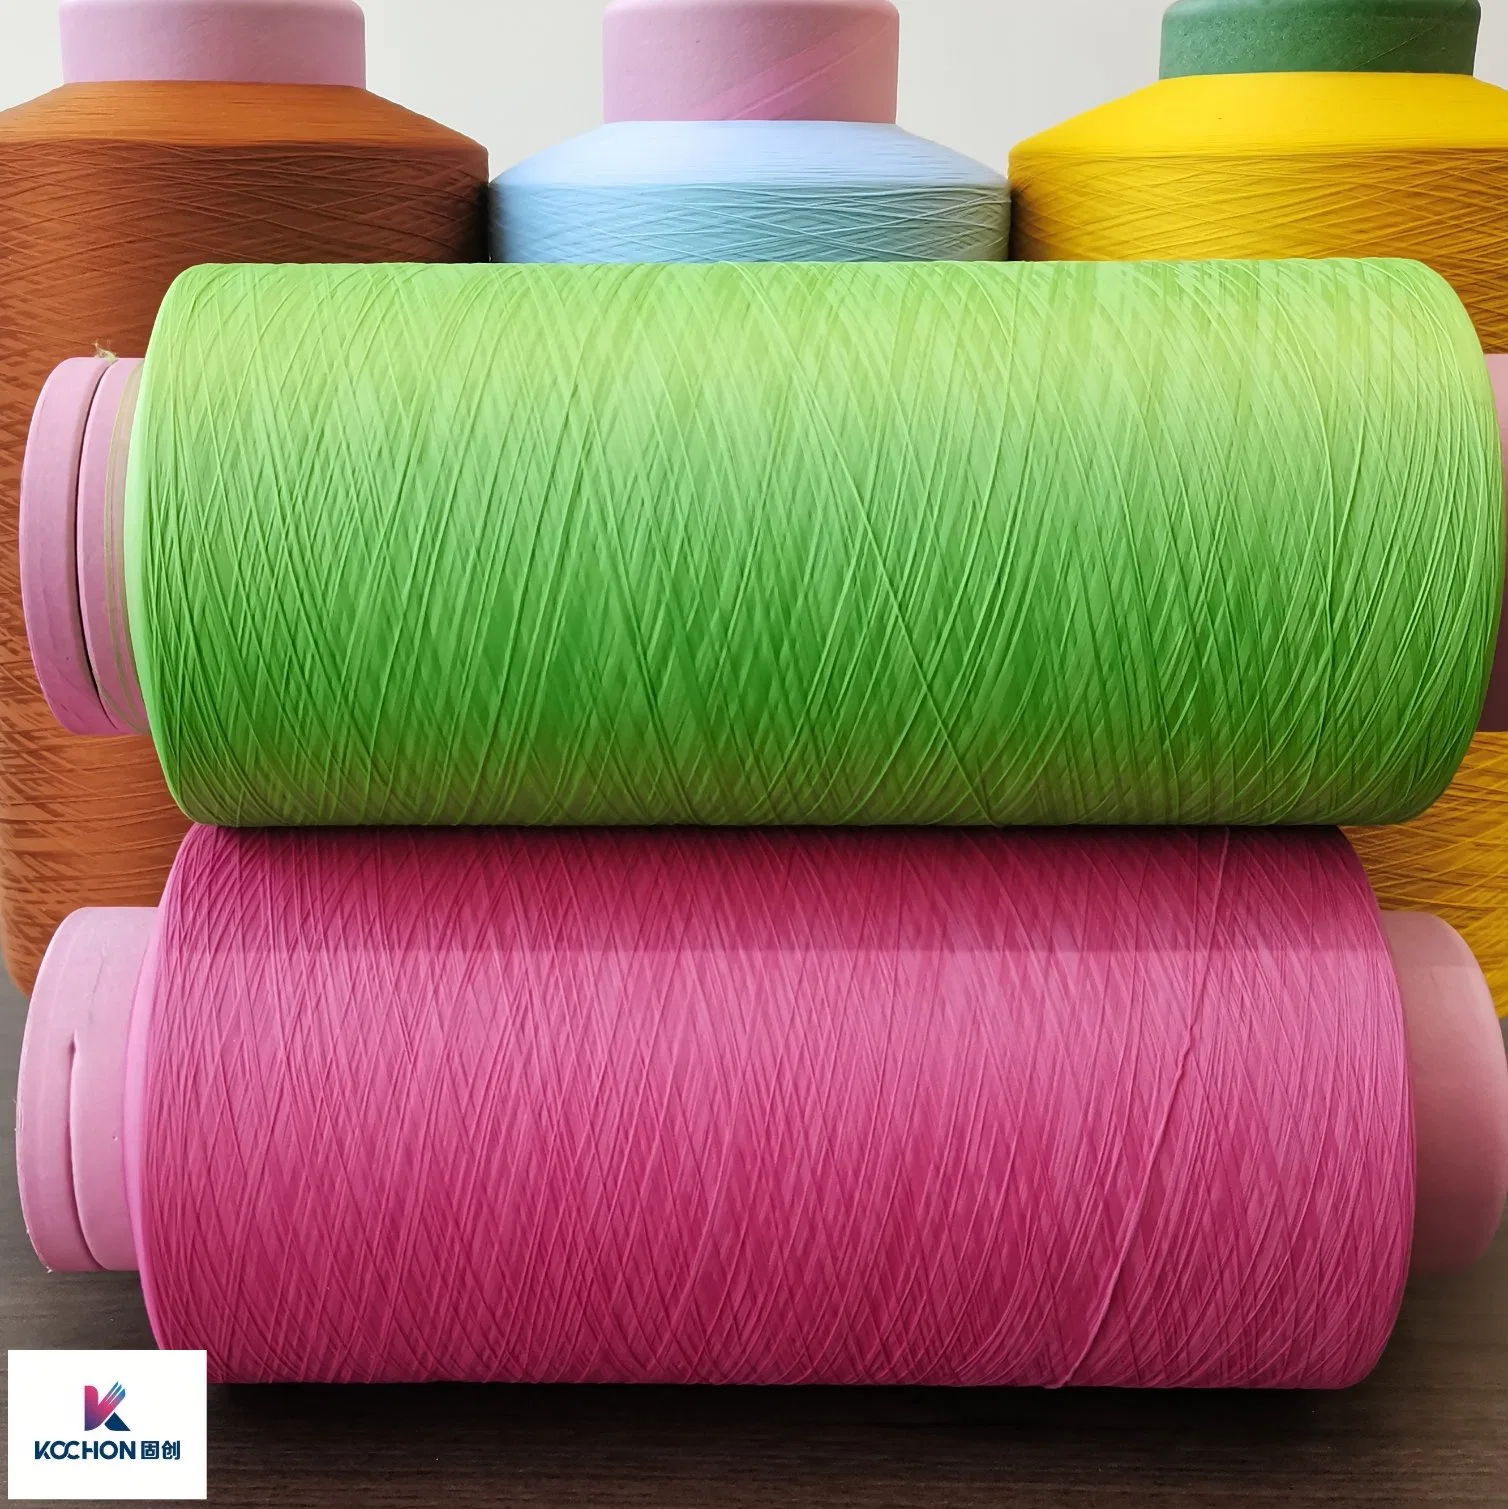 100% Nylon Dyed Yarn 70d 24f 48f DTY for Knitting and Weaving Gloves